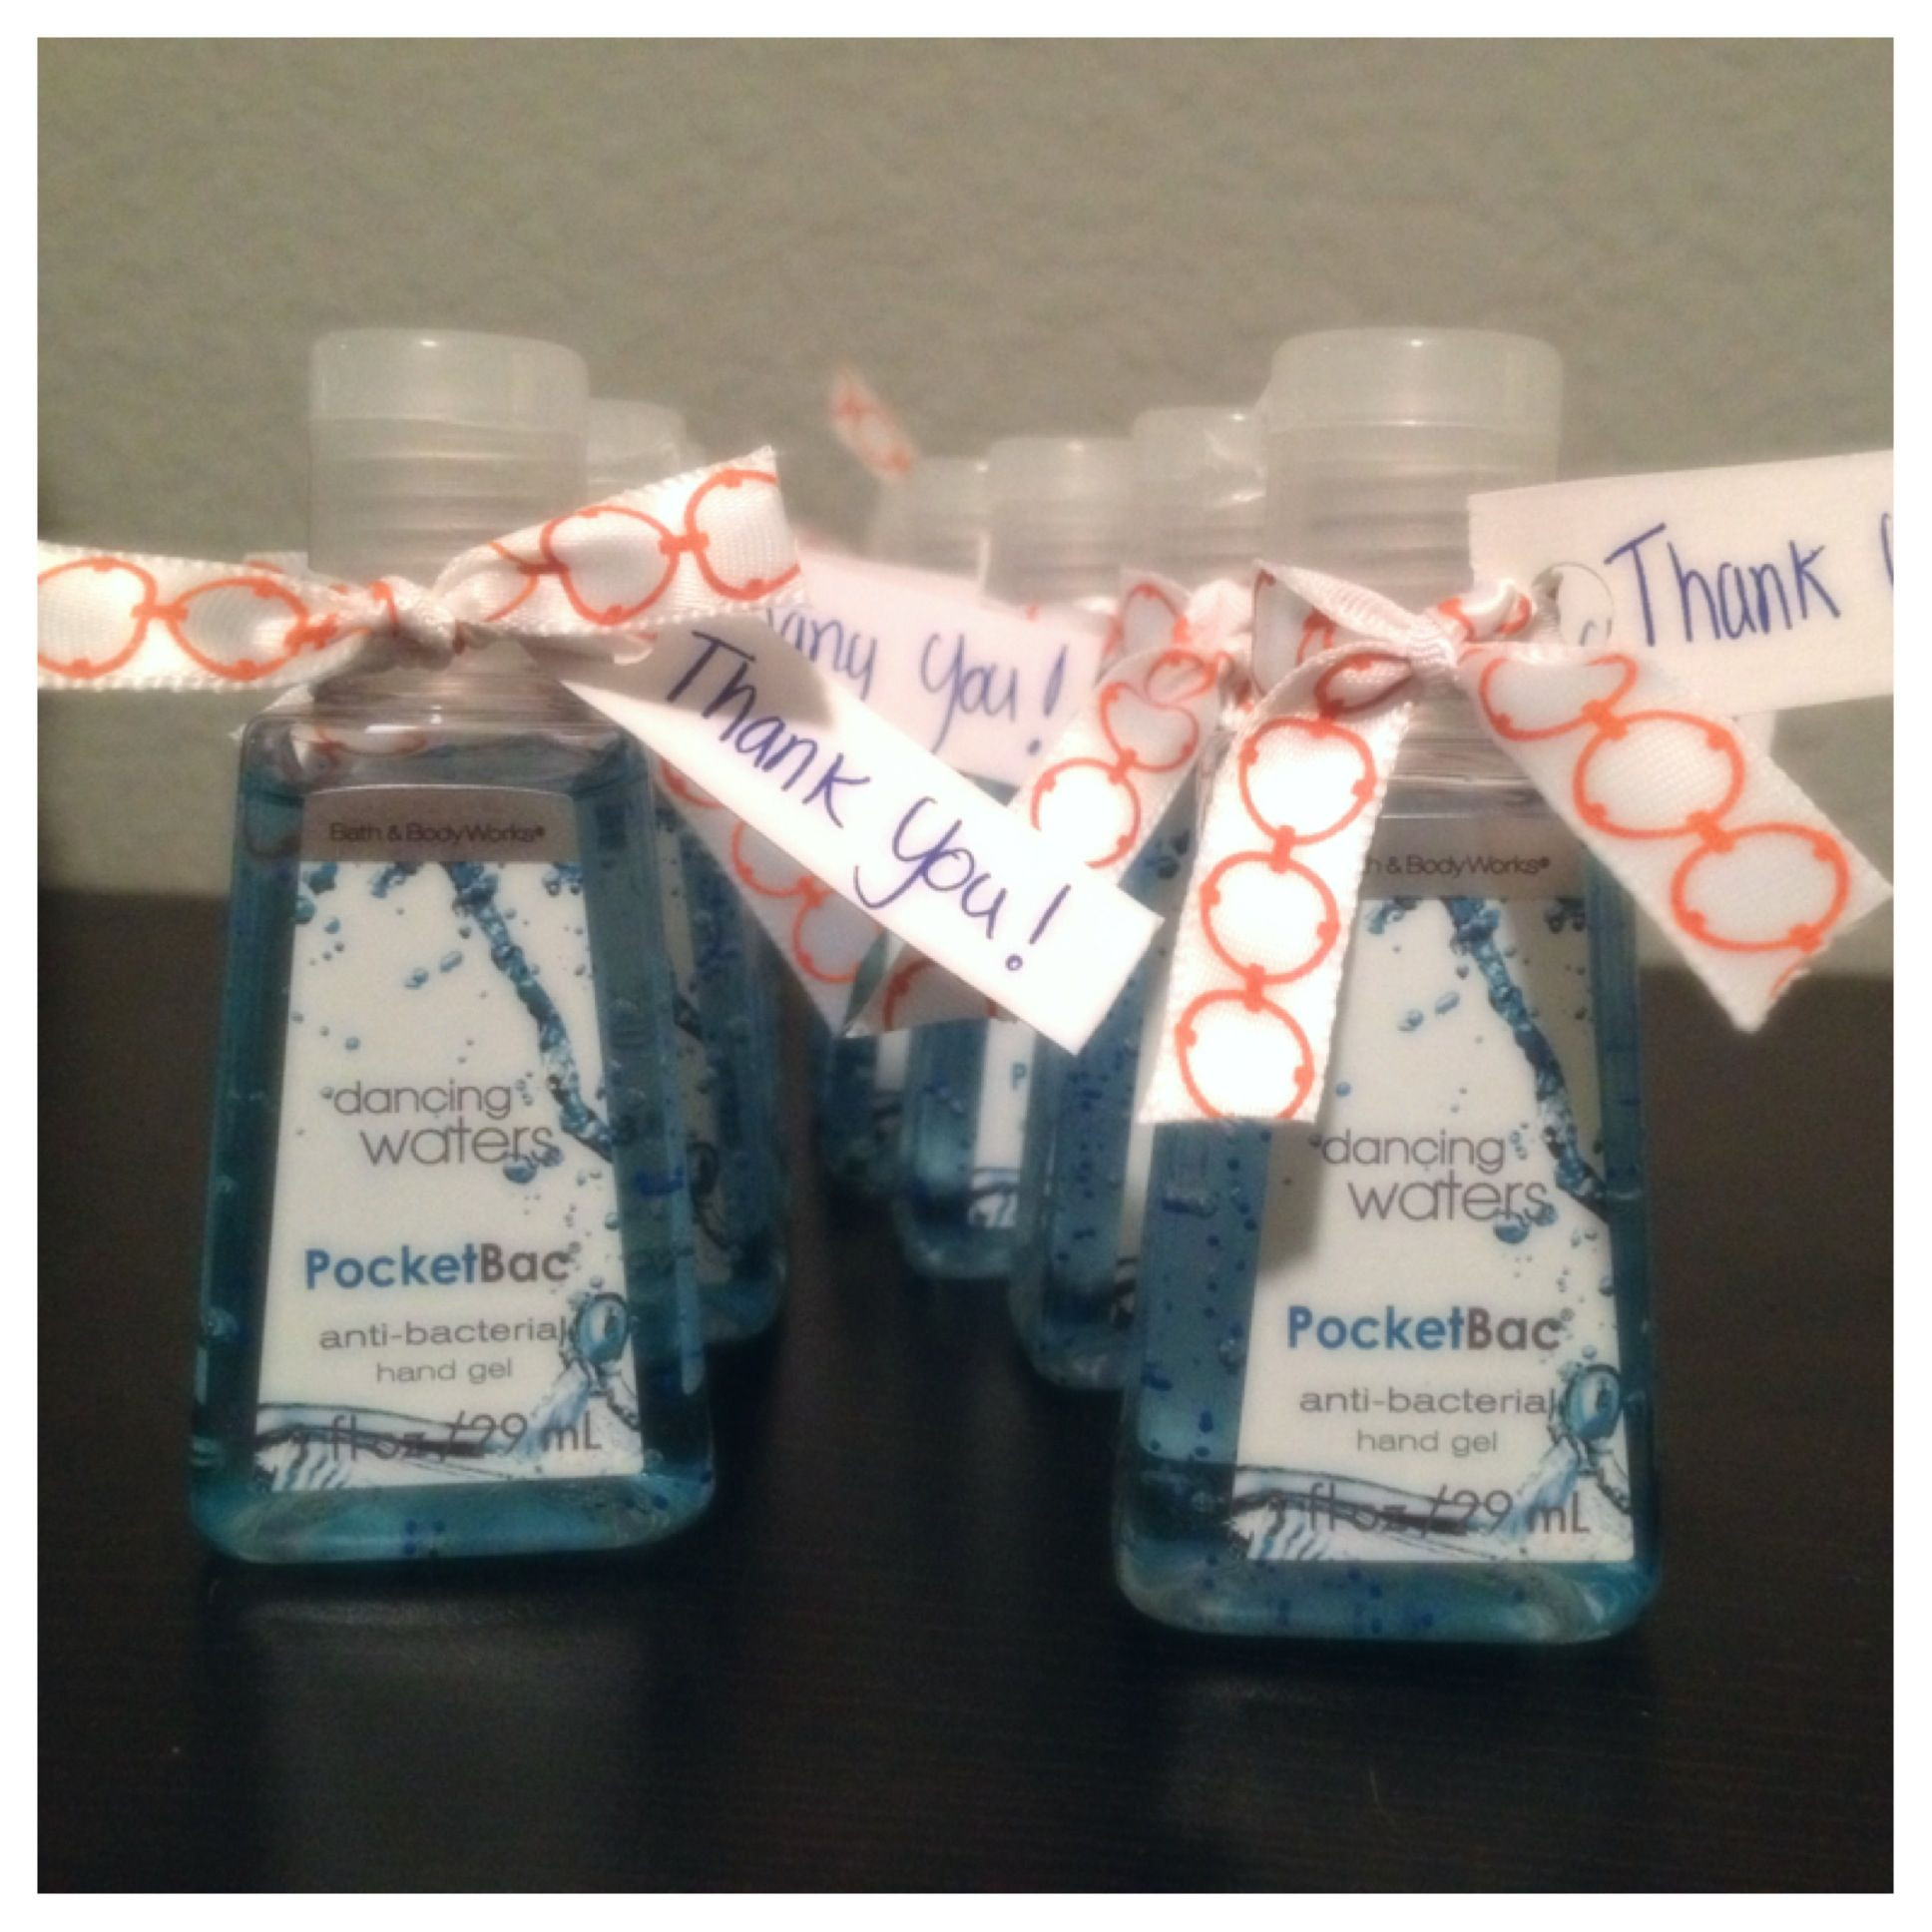 Thank You Gift Ideas For Baby Shower Guests
 "Thank you" t for my baby shower guest babyboy